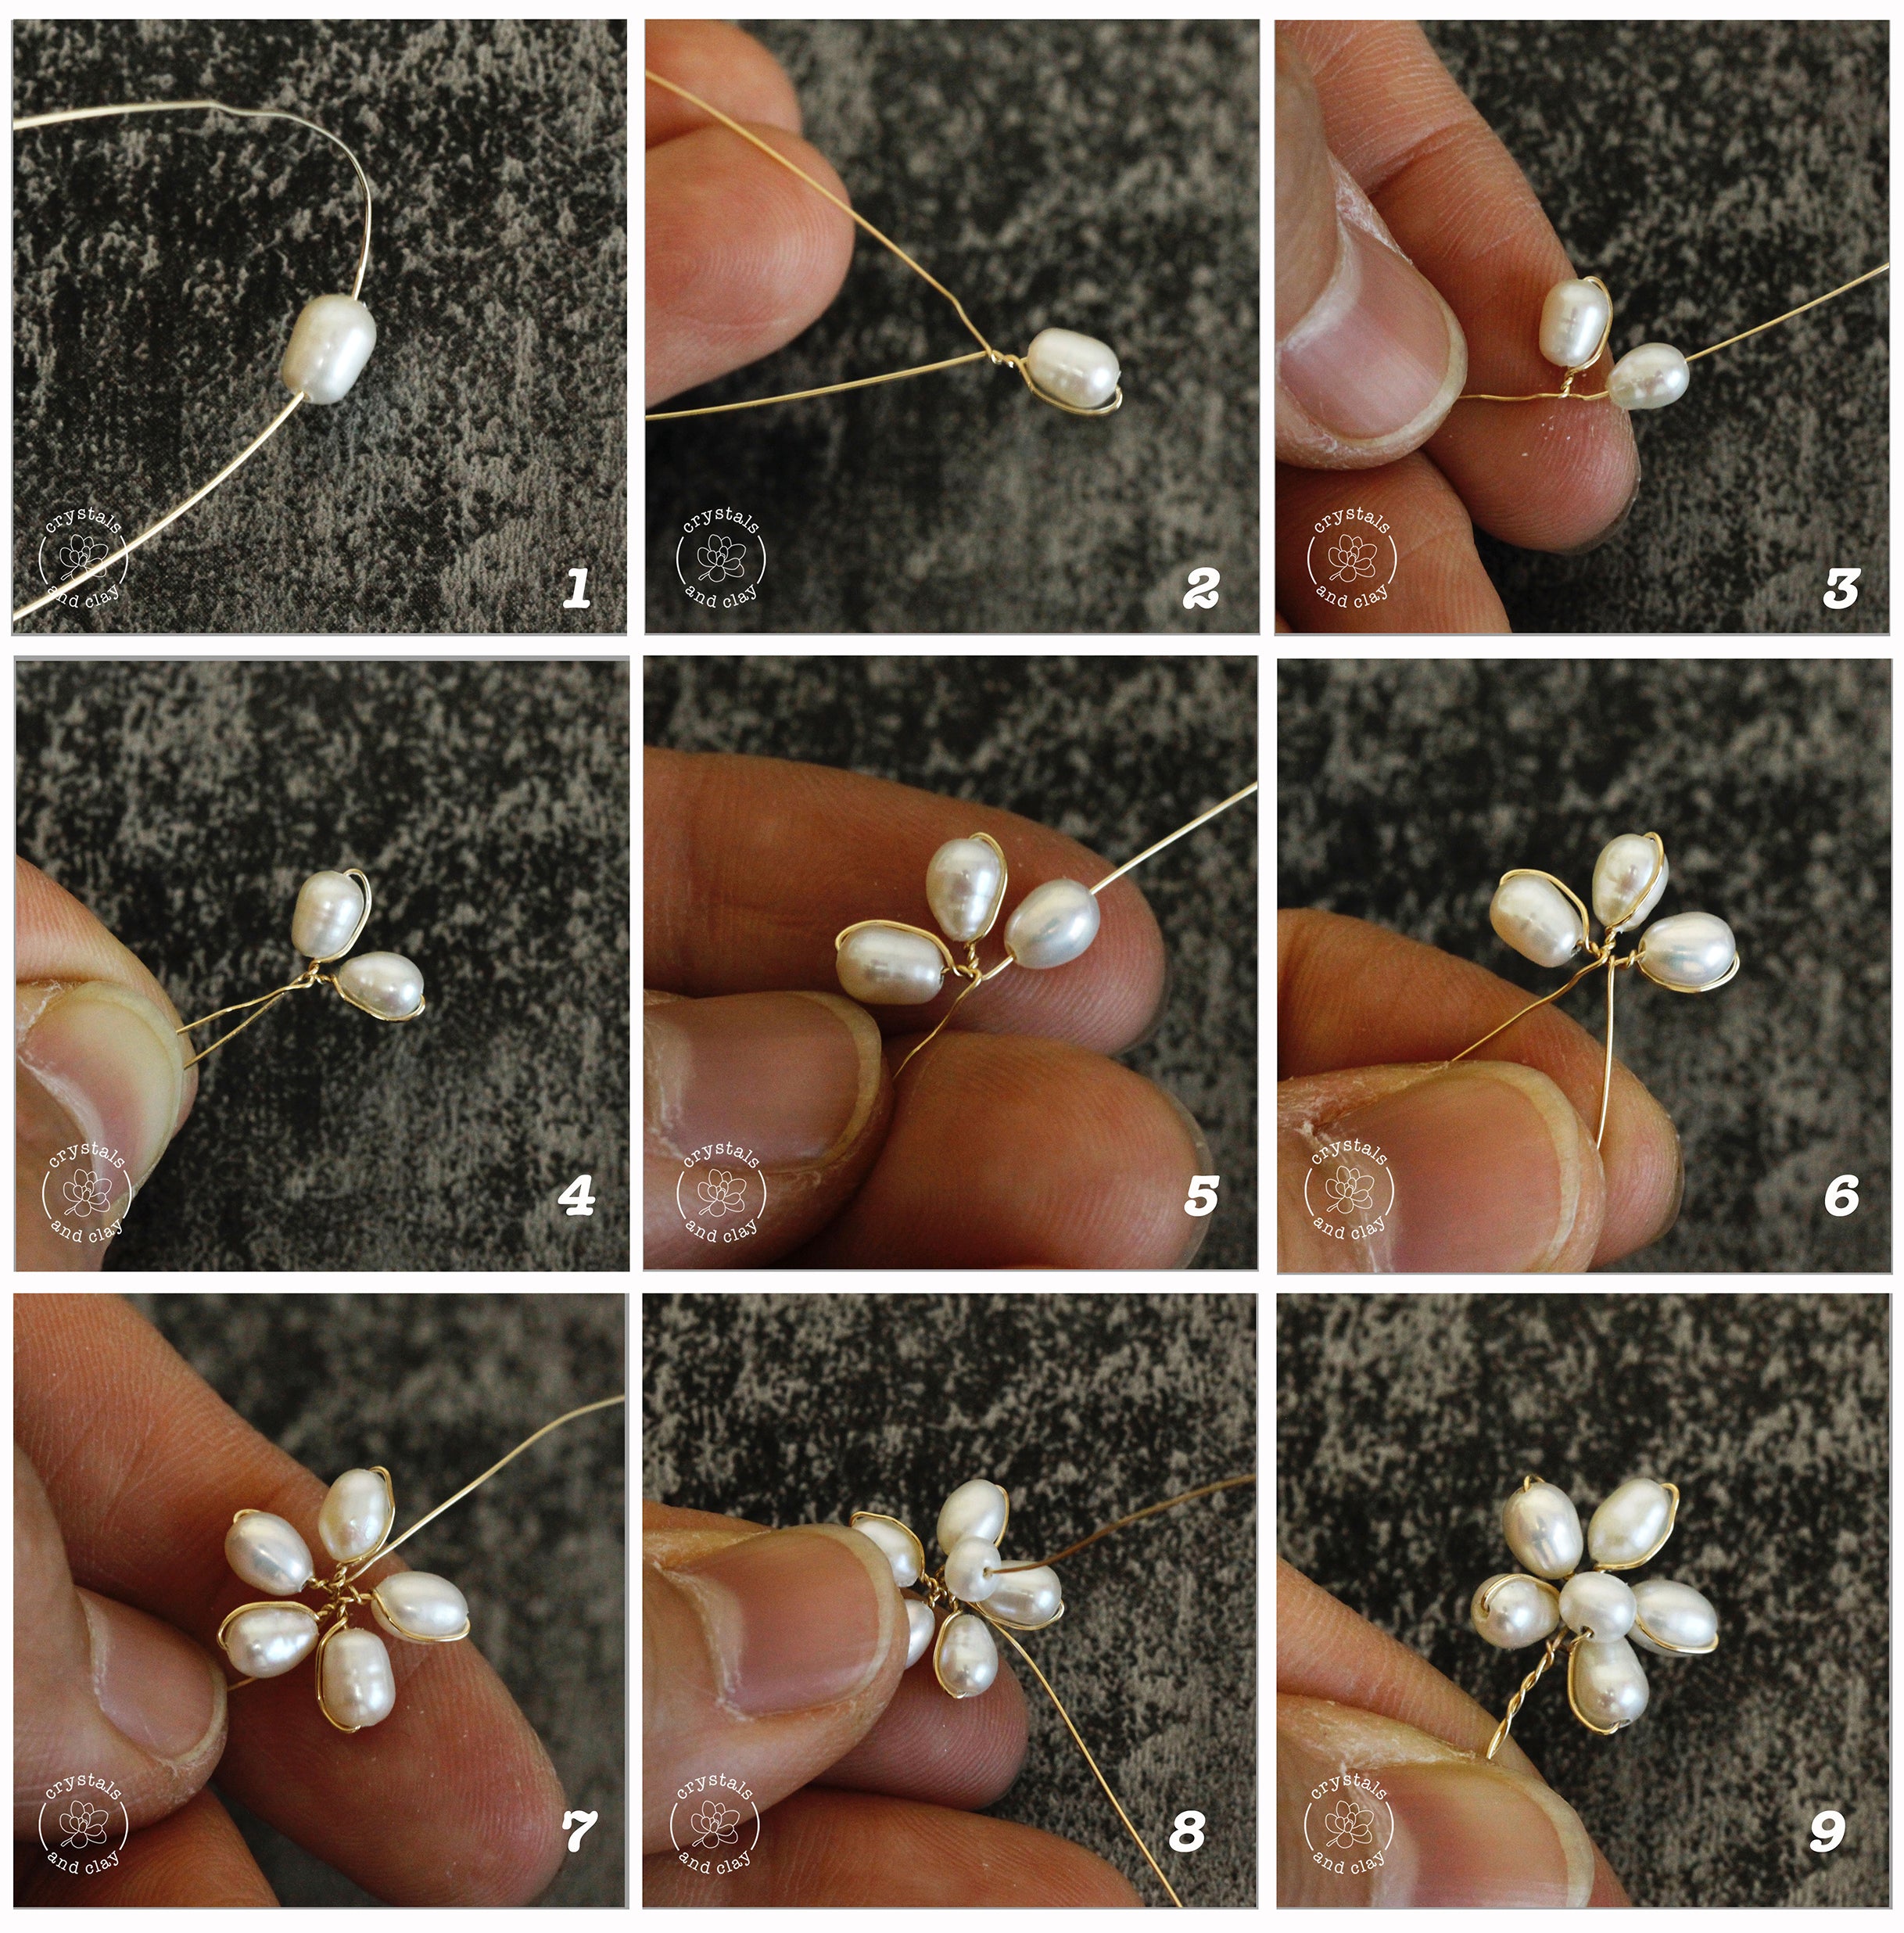 How to make flower seed beads! #flowerpwr #homemade #smallbusiness